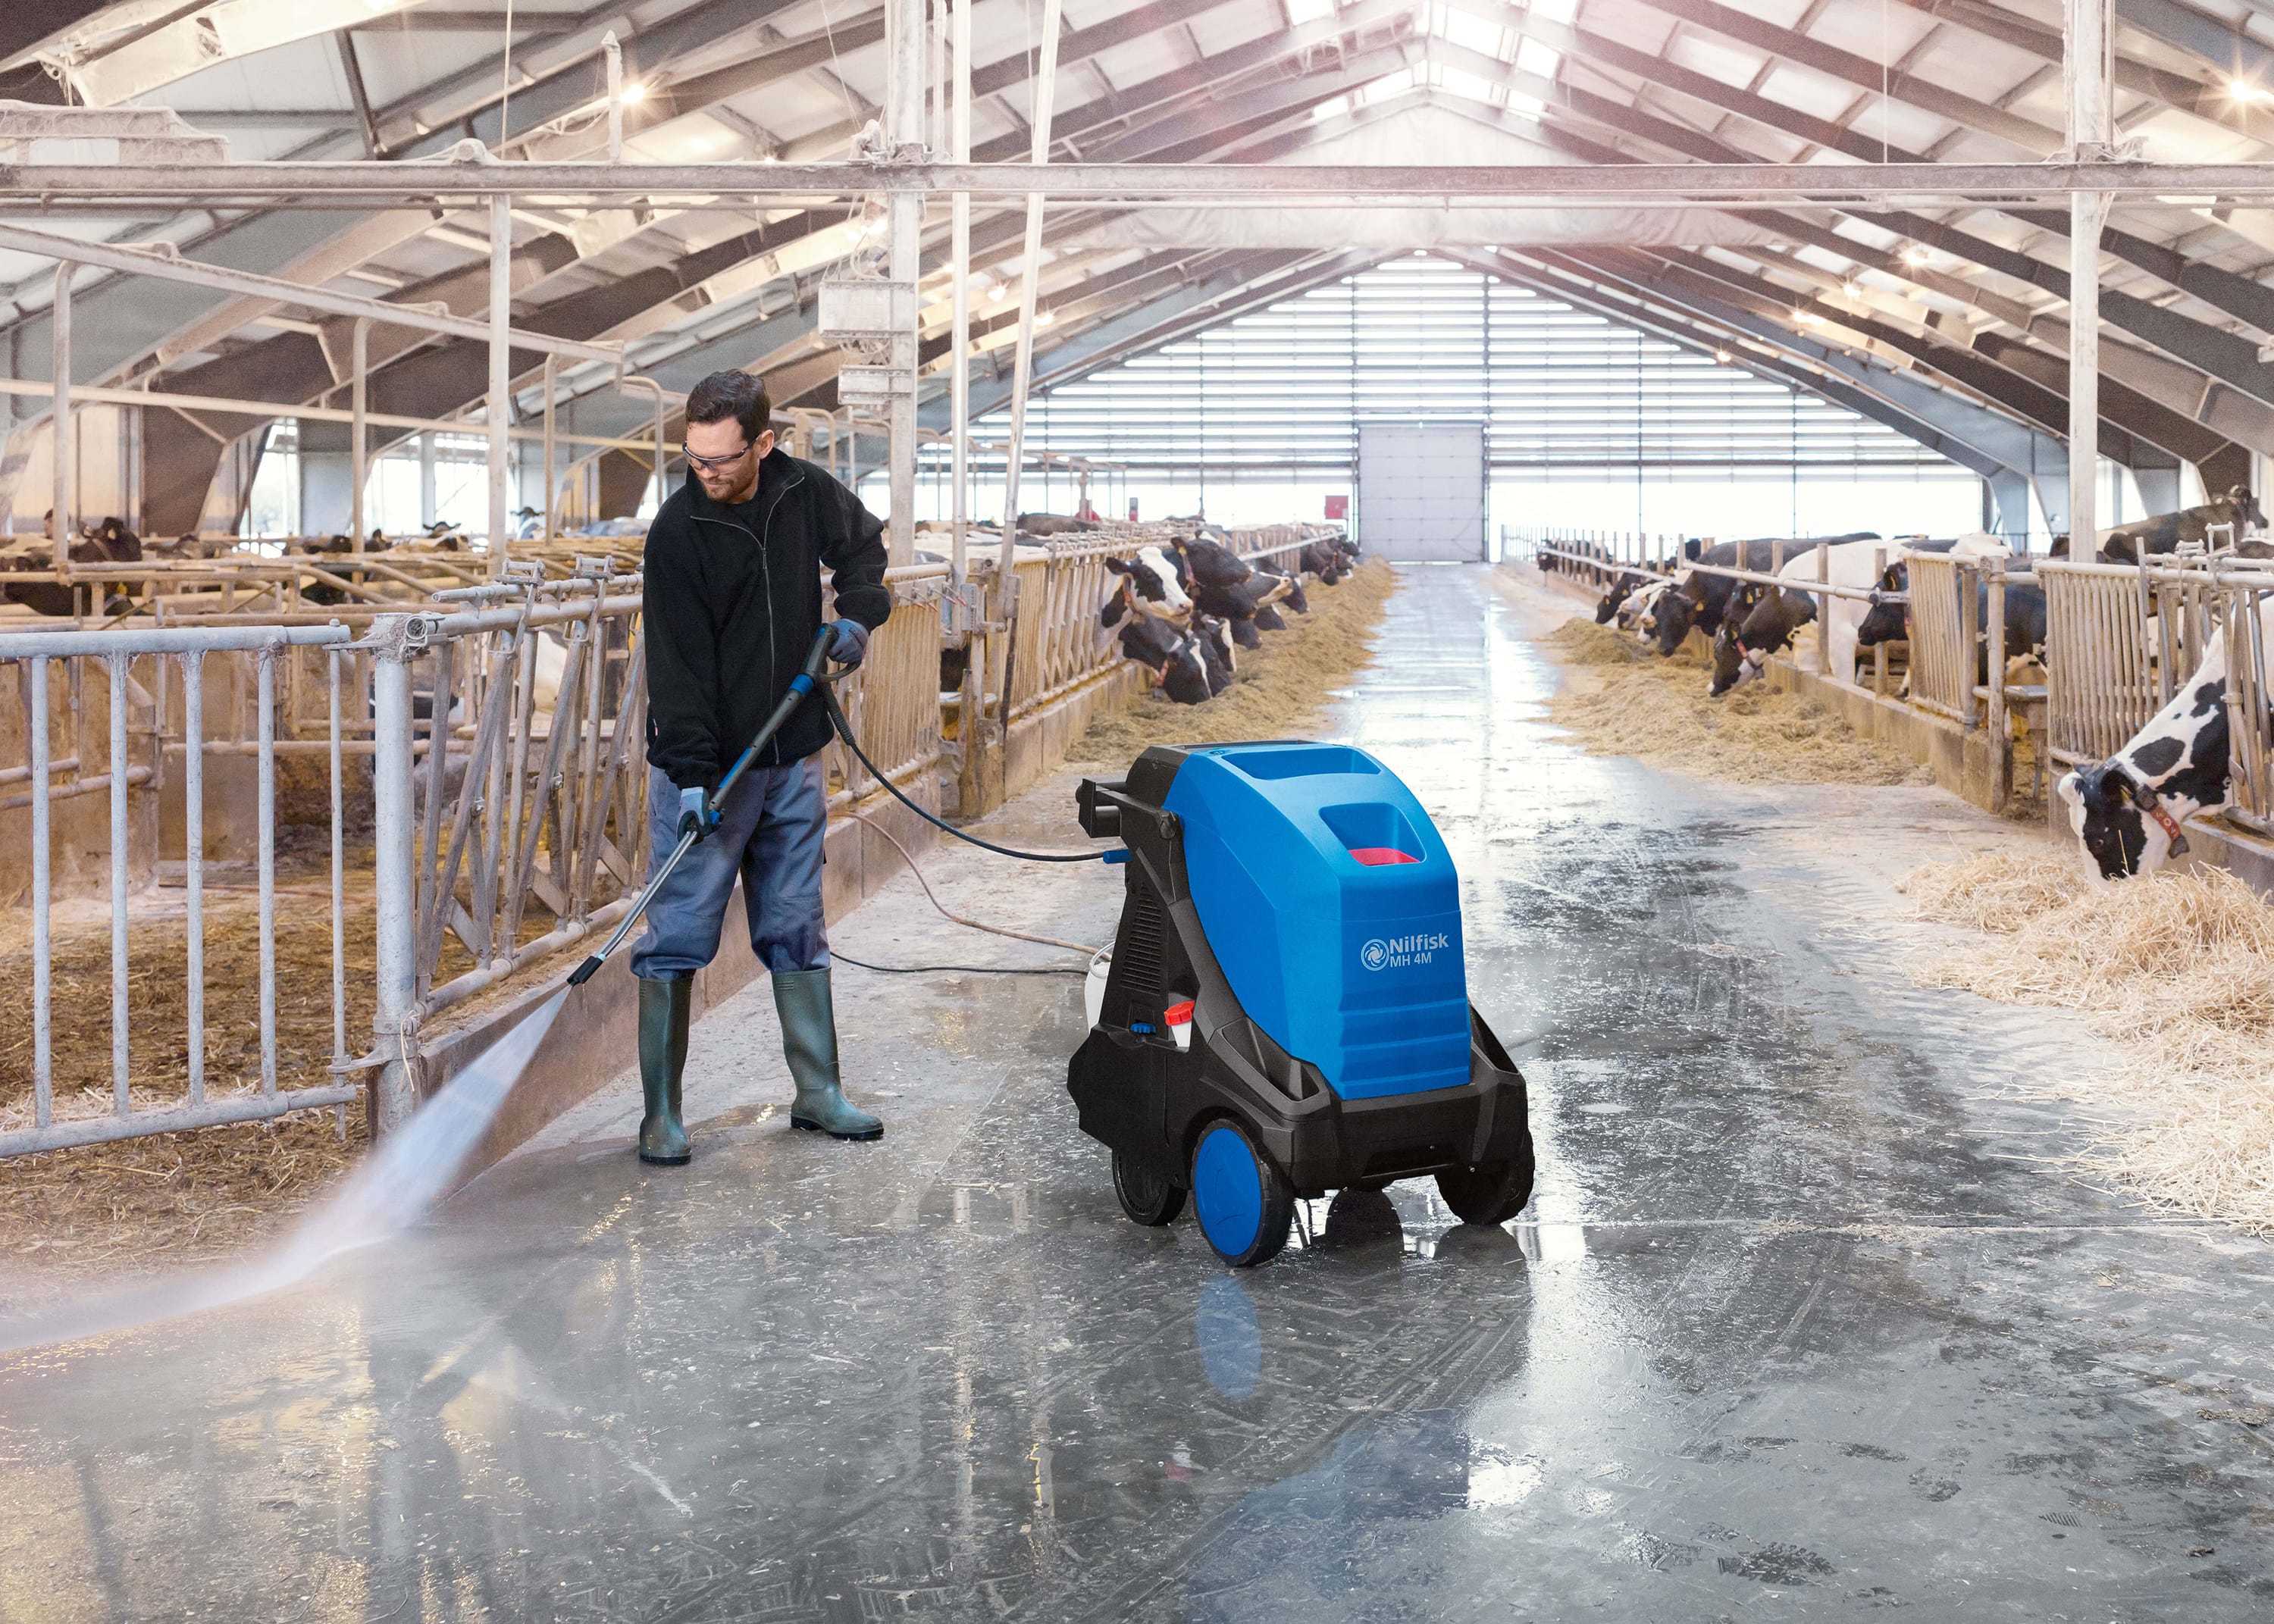 Hot mobile pressure washers